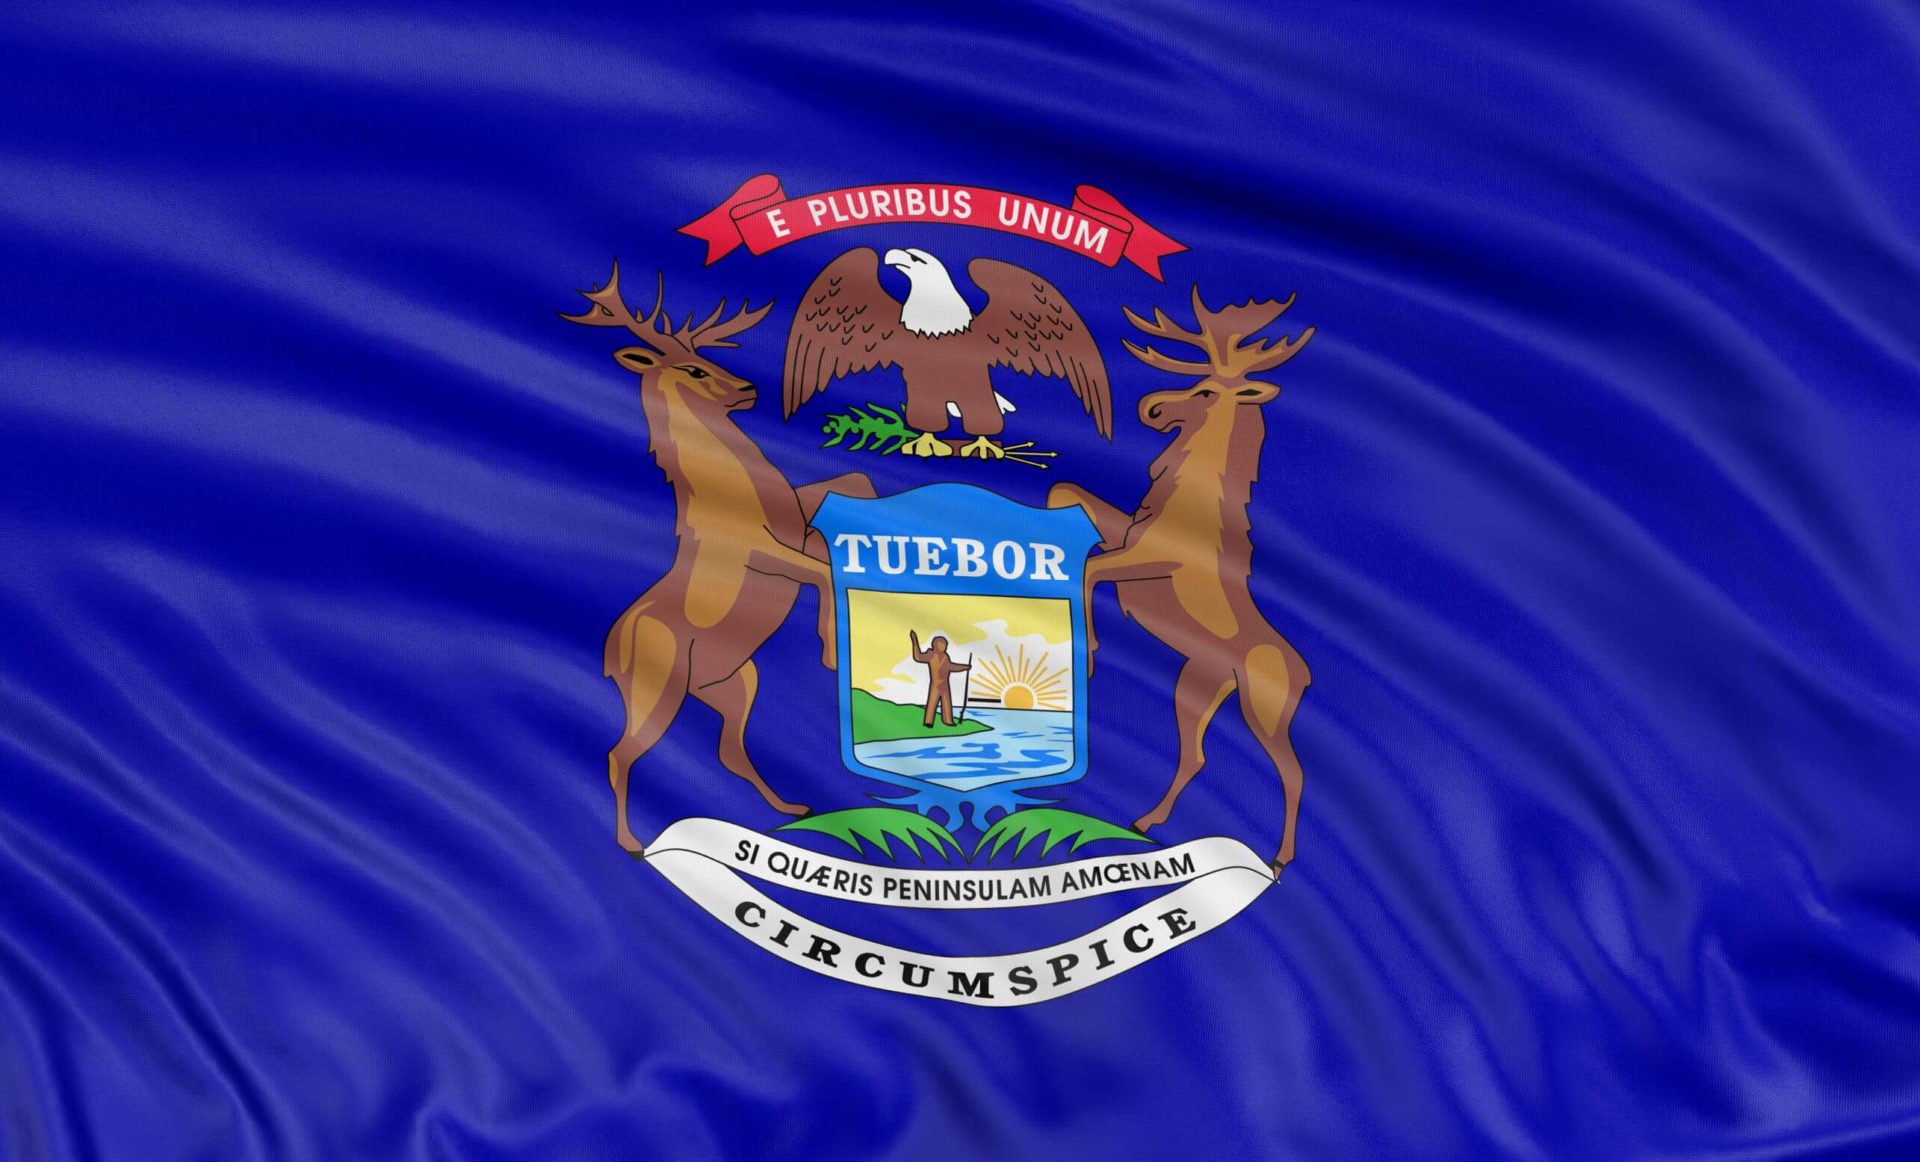 An image of the Michigan state flag.